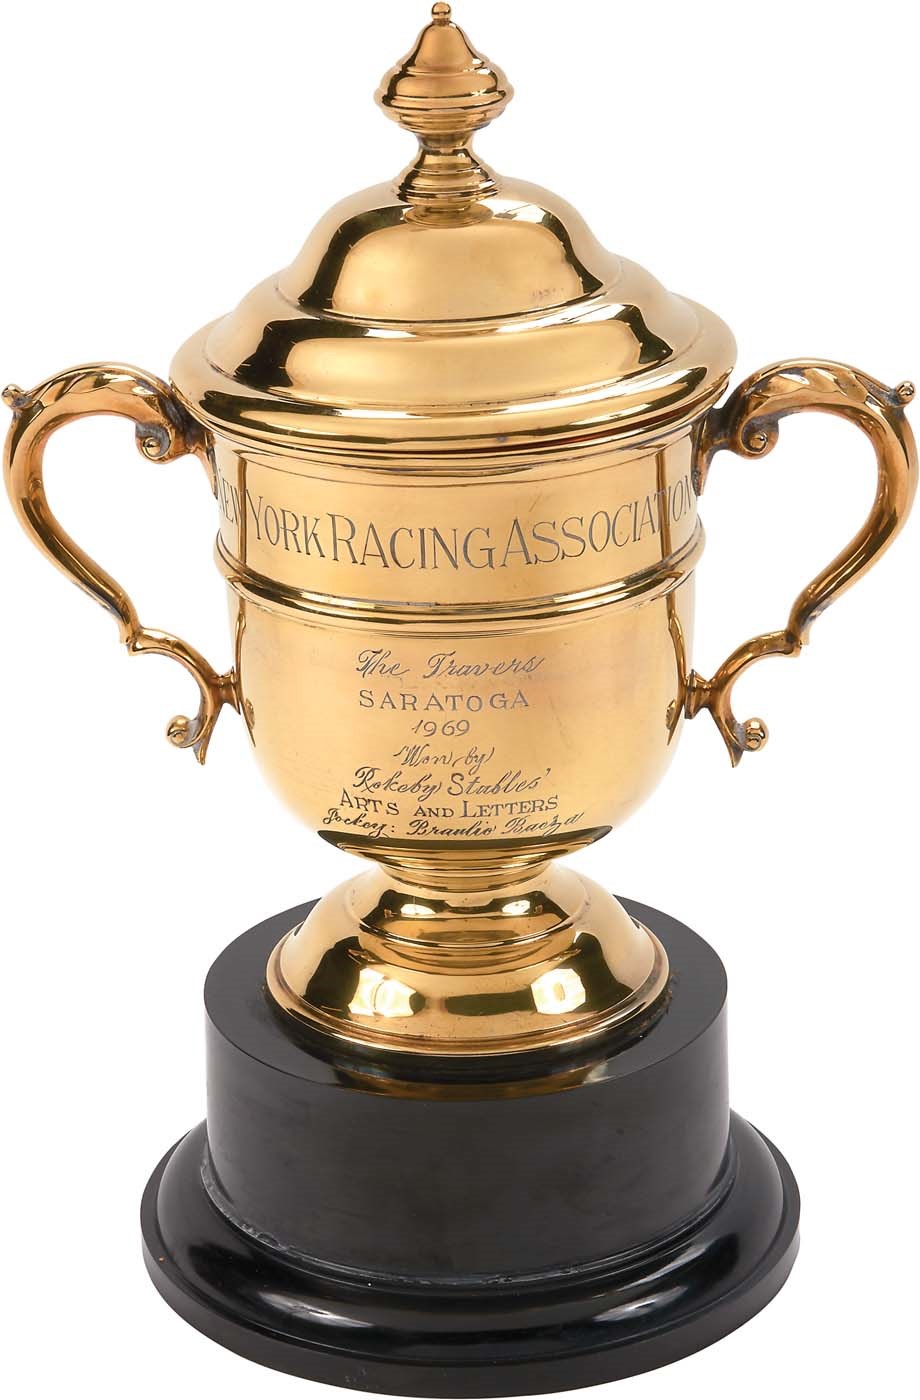 Horse Racing - 1969 Arts & Letters Gold Plated Travers Winning Trophy Cup from the Personal Collection of Braulio Baeza